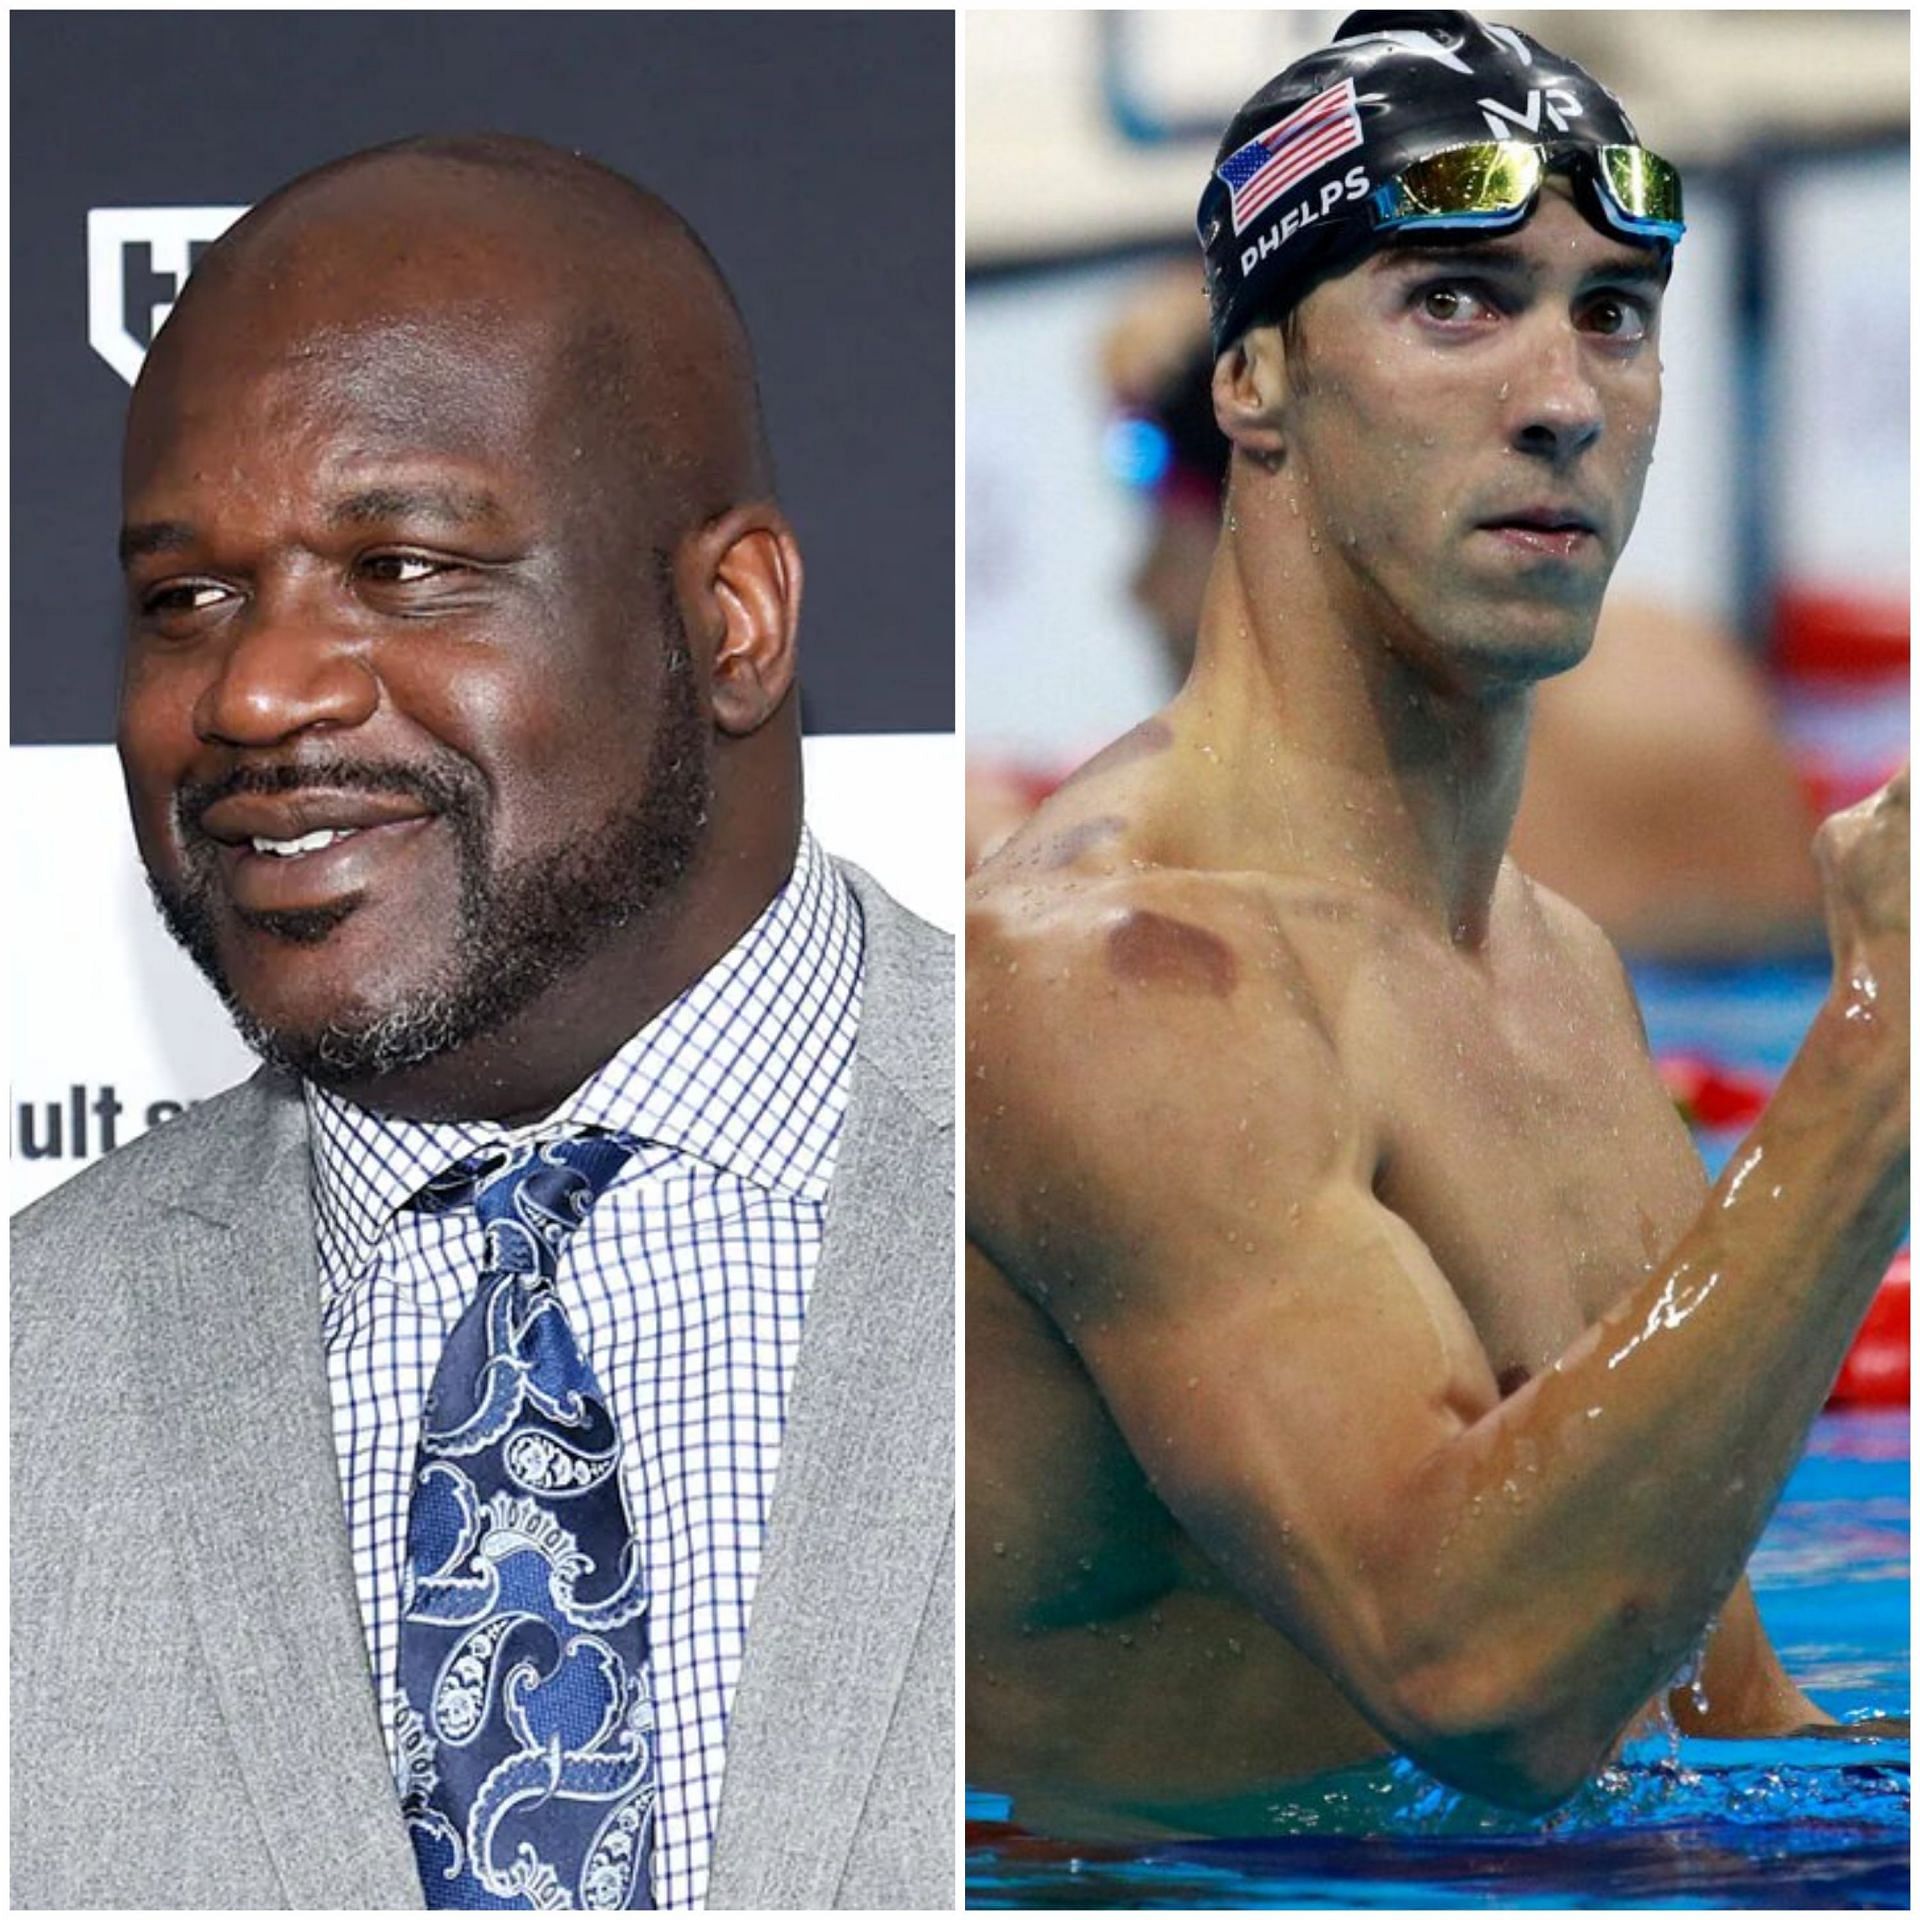 Michael Phelps (R) reveals working out with Shaquille O